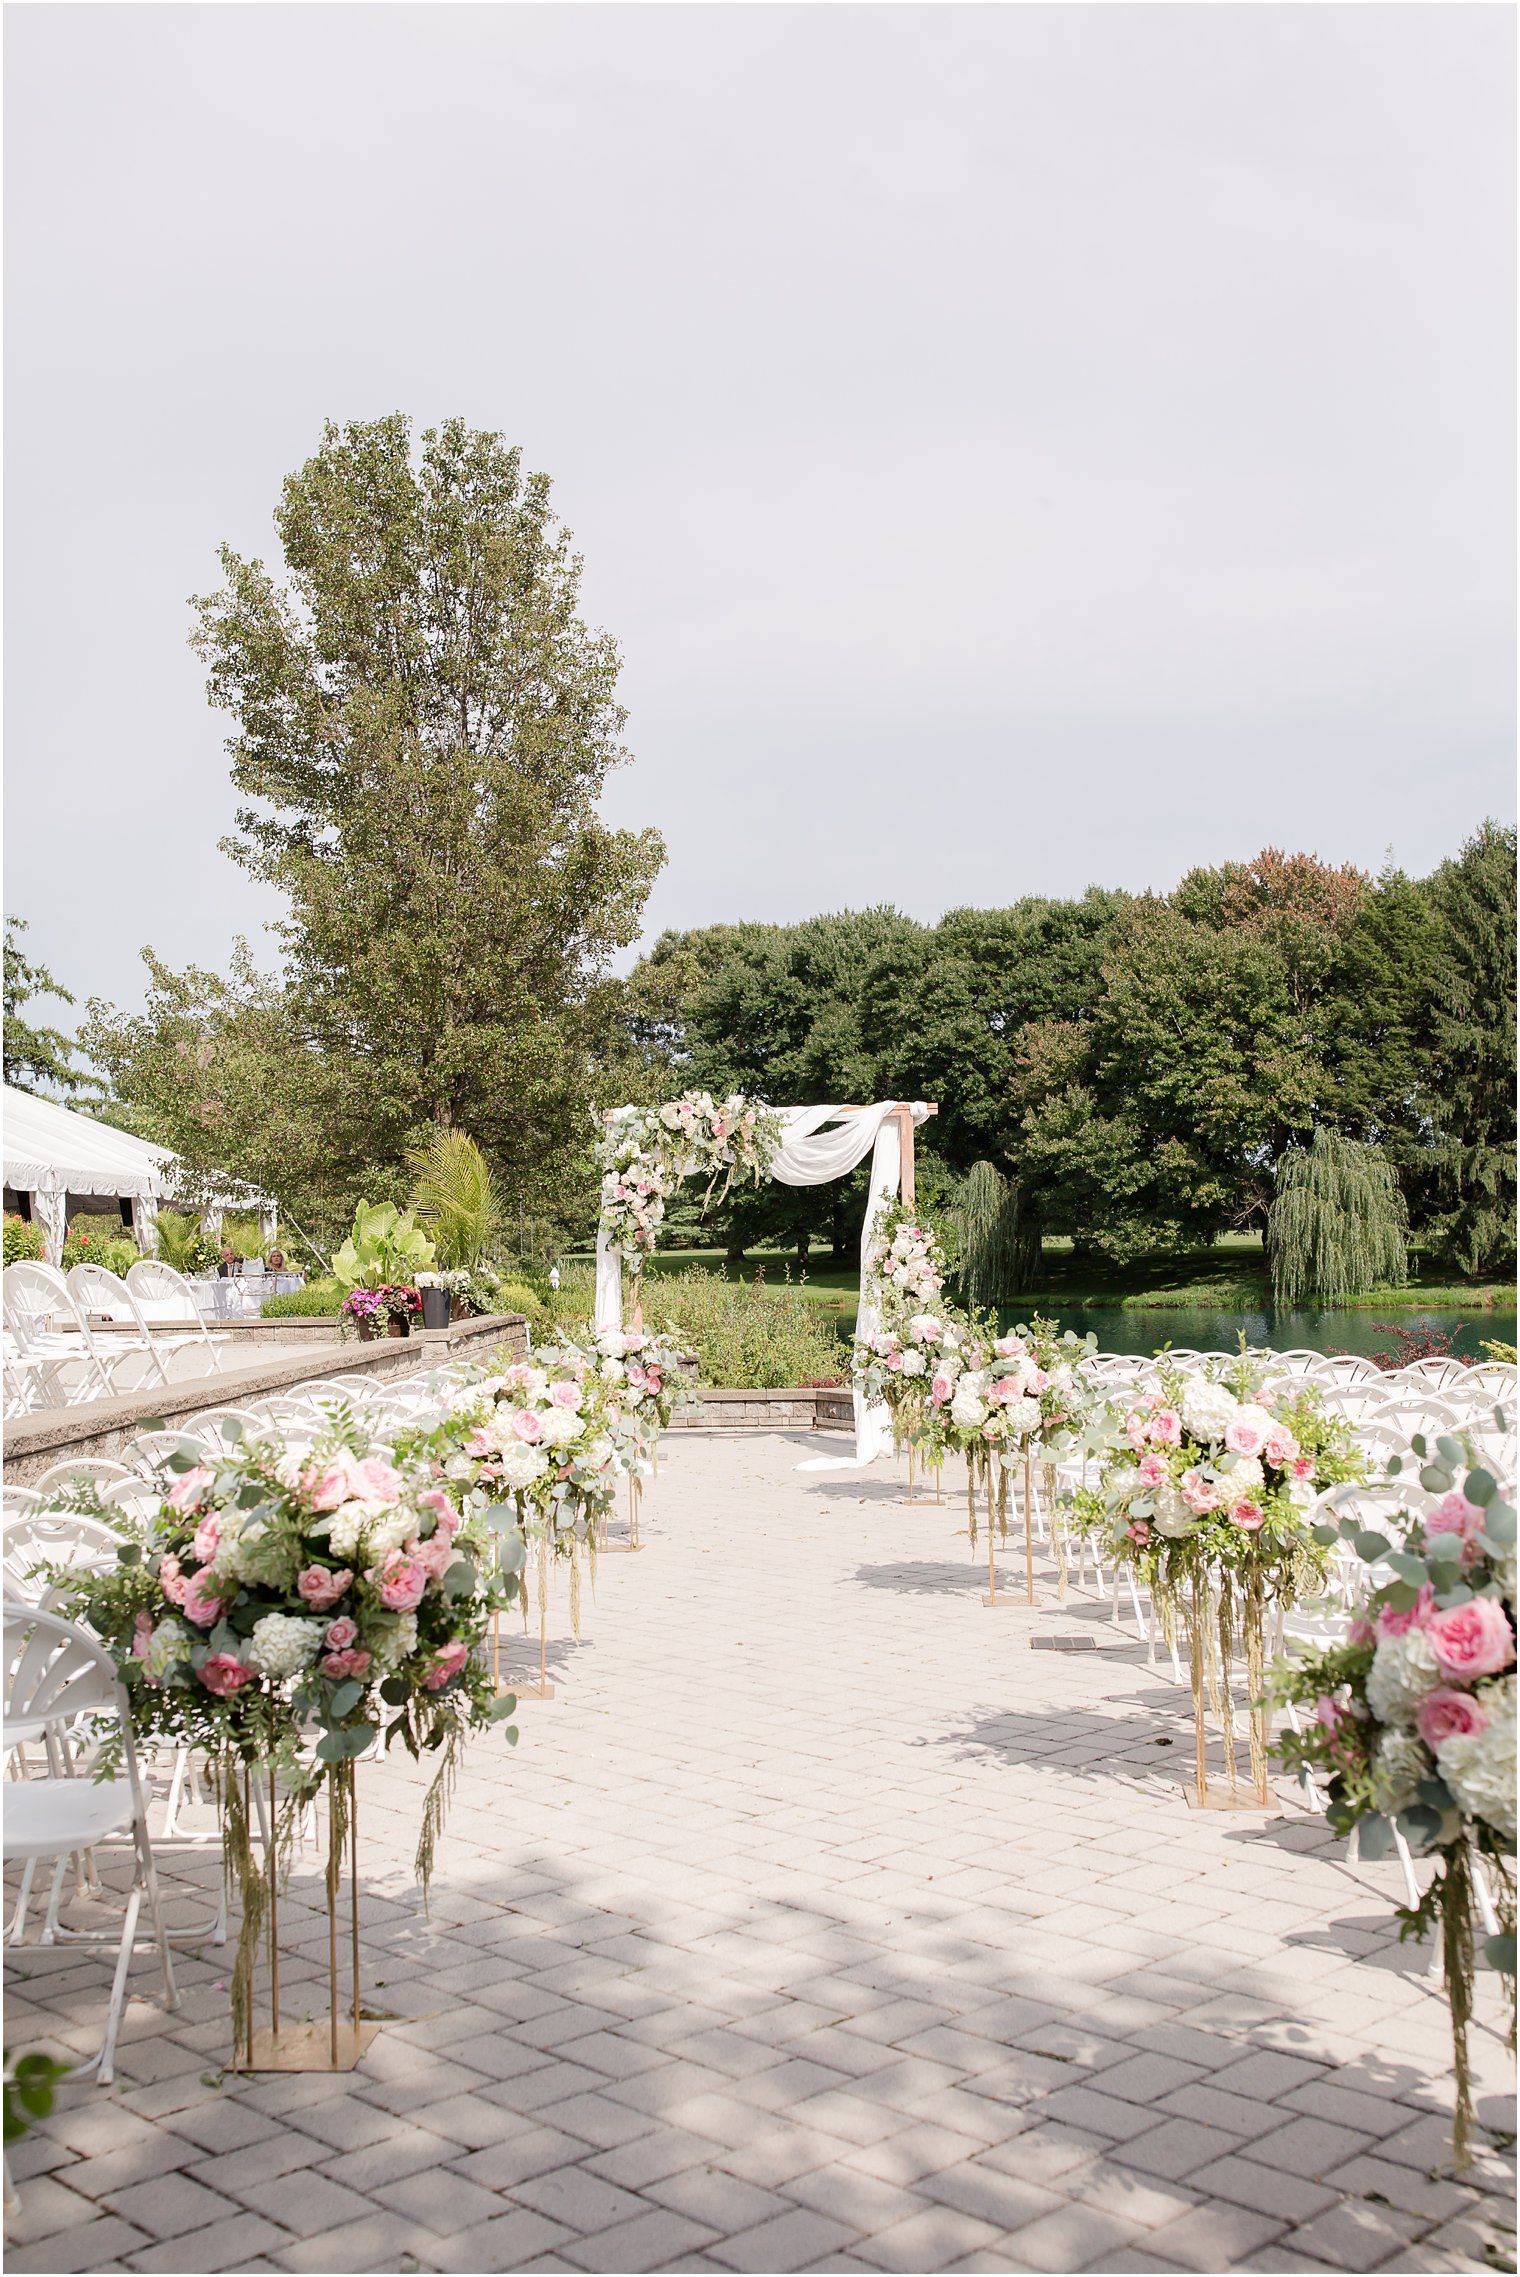 Ceremony florals by Peonies to Paintchips